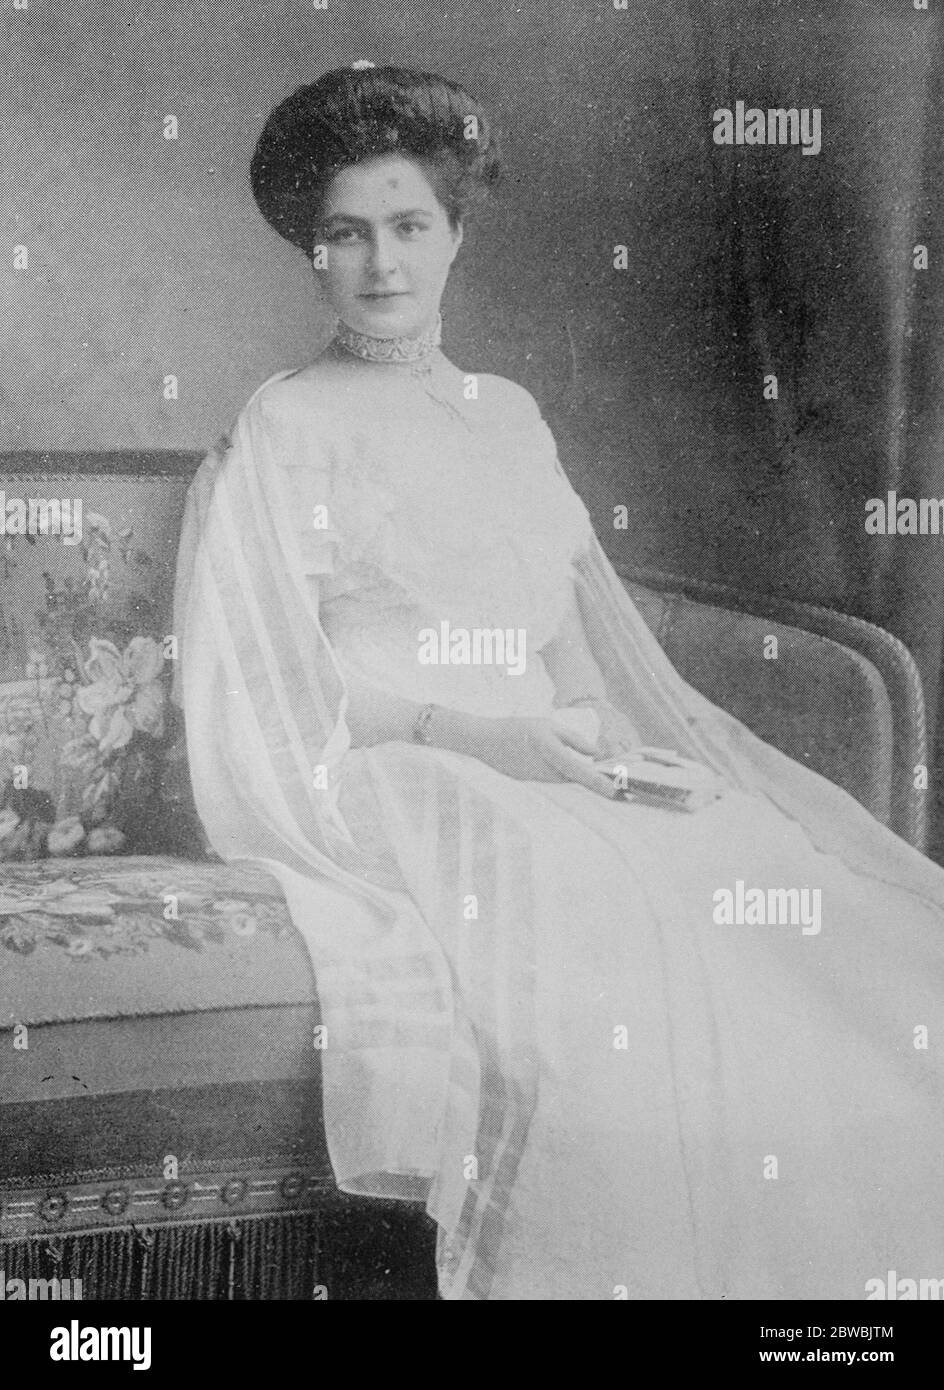 Ex Kaisers Dummy Bride Princess Ida of Stolberg Rossla , Princess Hermines younger sister , who successfully hoaxed hundreads of photographers by impersonating Princess Hermine at Amersfoort railway station   6 November 1922 Stock Photo